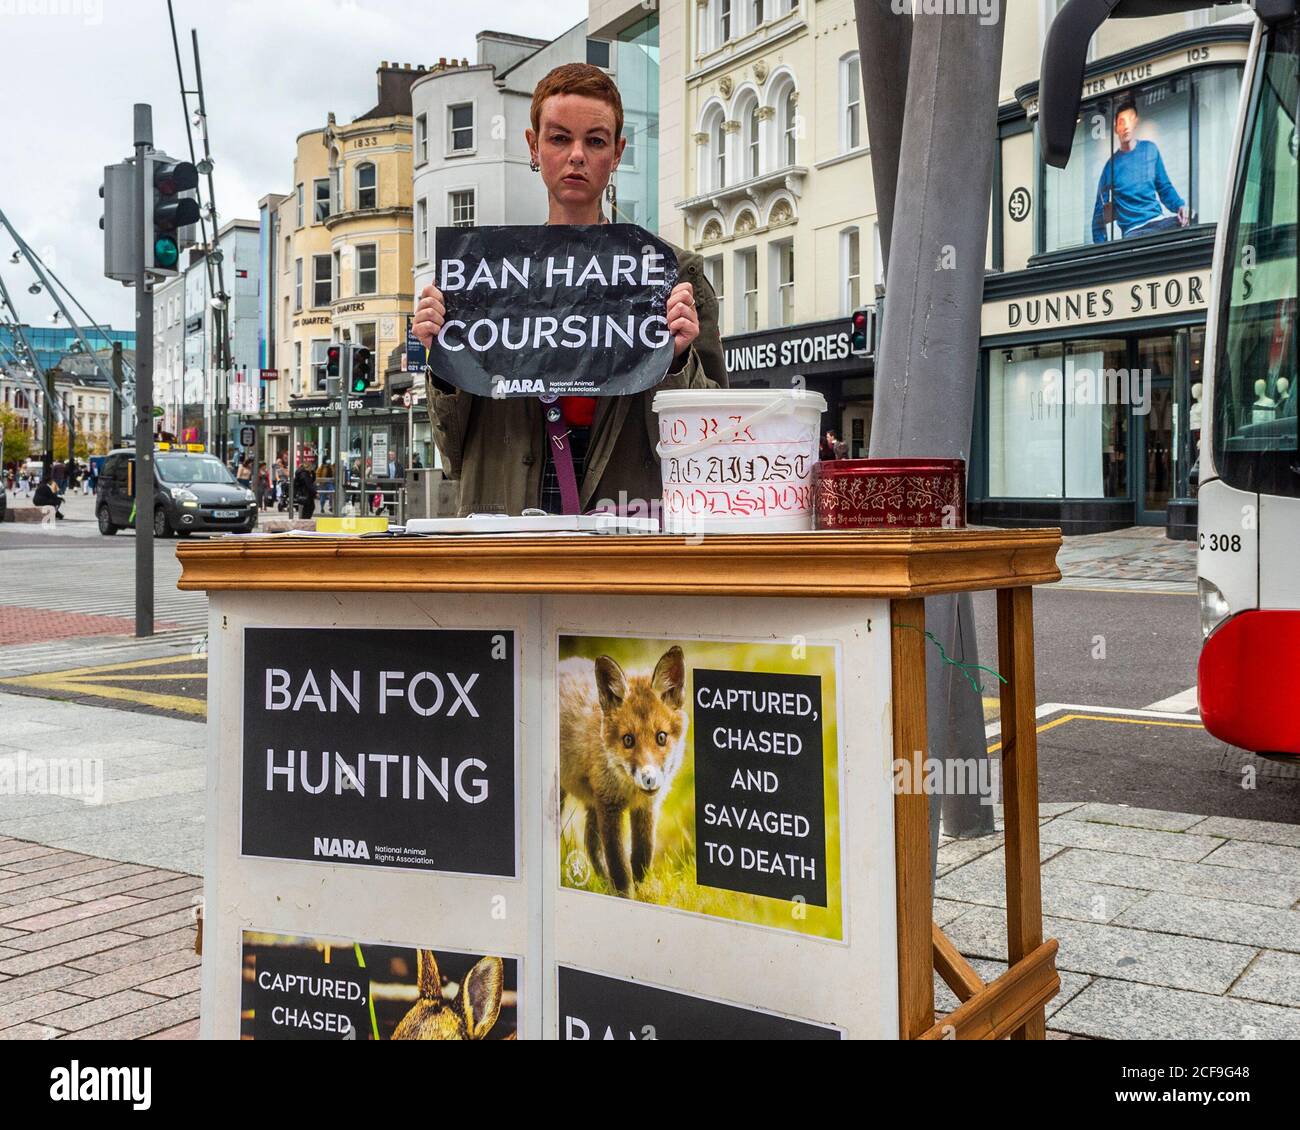 Cork, Ireland. 4th Sep, 2020. Diane Keevans of the 'Cork Against Bloodsports' group stands at an information table on Patrick Street, Cork, this morning. Ms Keevans is highlighting the plight of foxes and hares and says fox hunting and hare coursing should be banned. Ms Keevans is in court in Limerick later this month for an alleged assault against a member of the hunt, a charge she denies. Credit: AG News/Alamy Live News Stock Photo